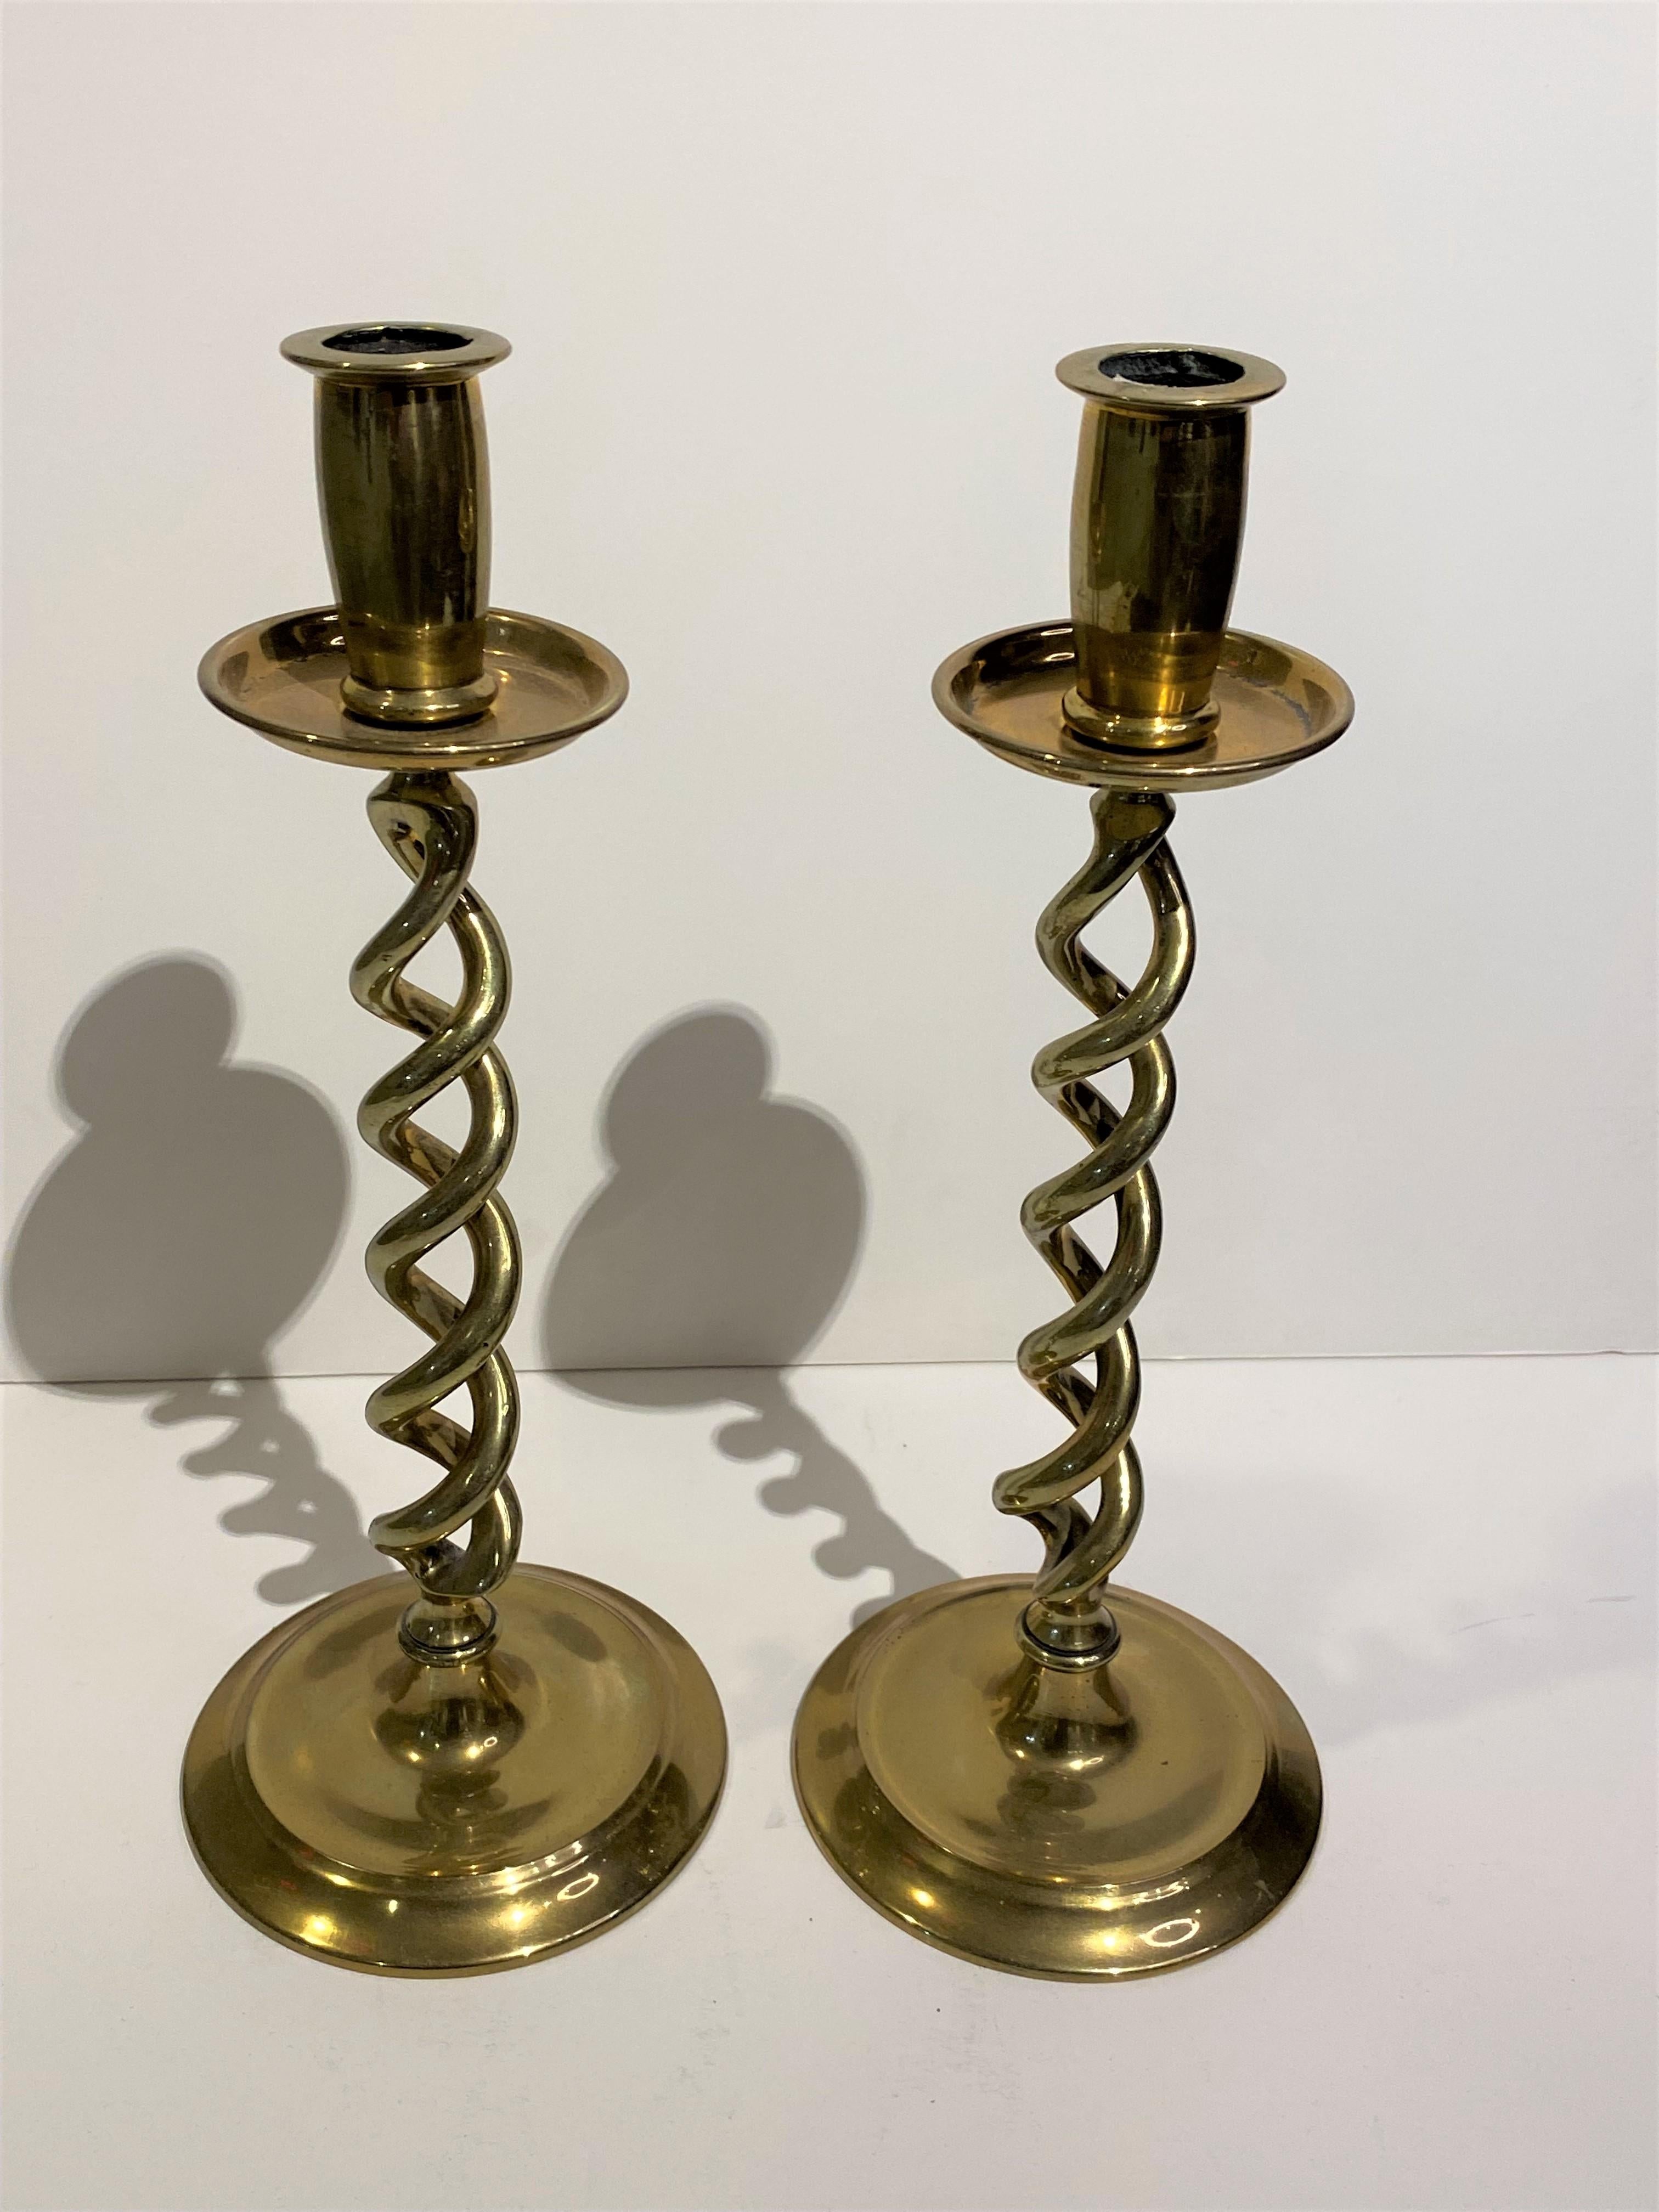 Pair of Old Open Twist Brass Candlesticks from England In Excellent Condition For Sale In North Salem, NY